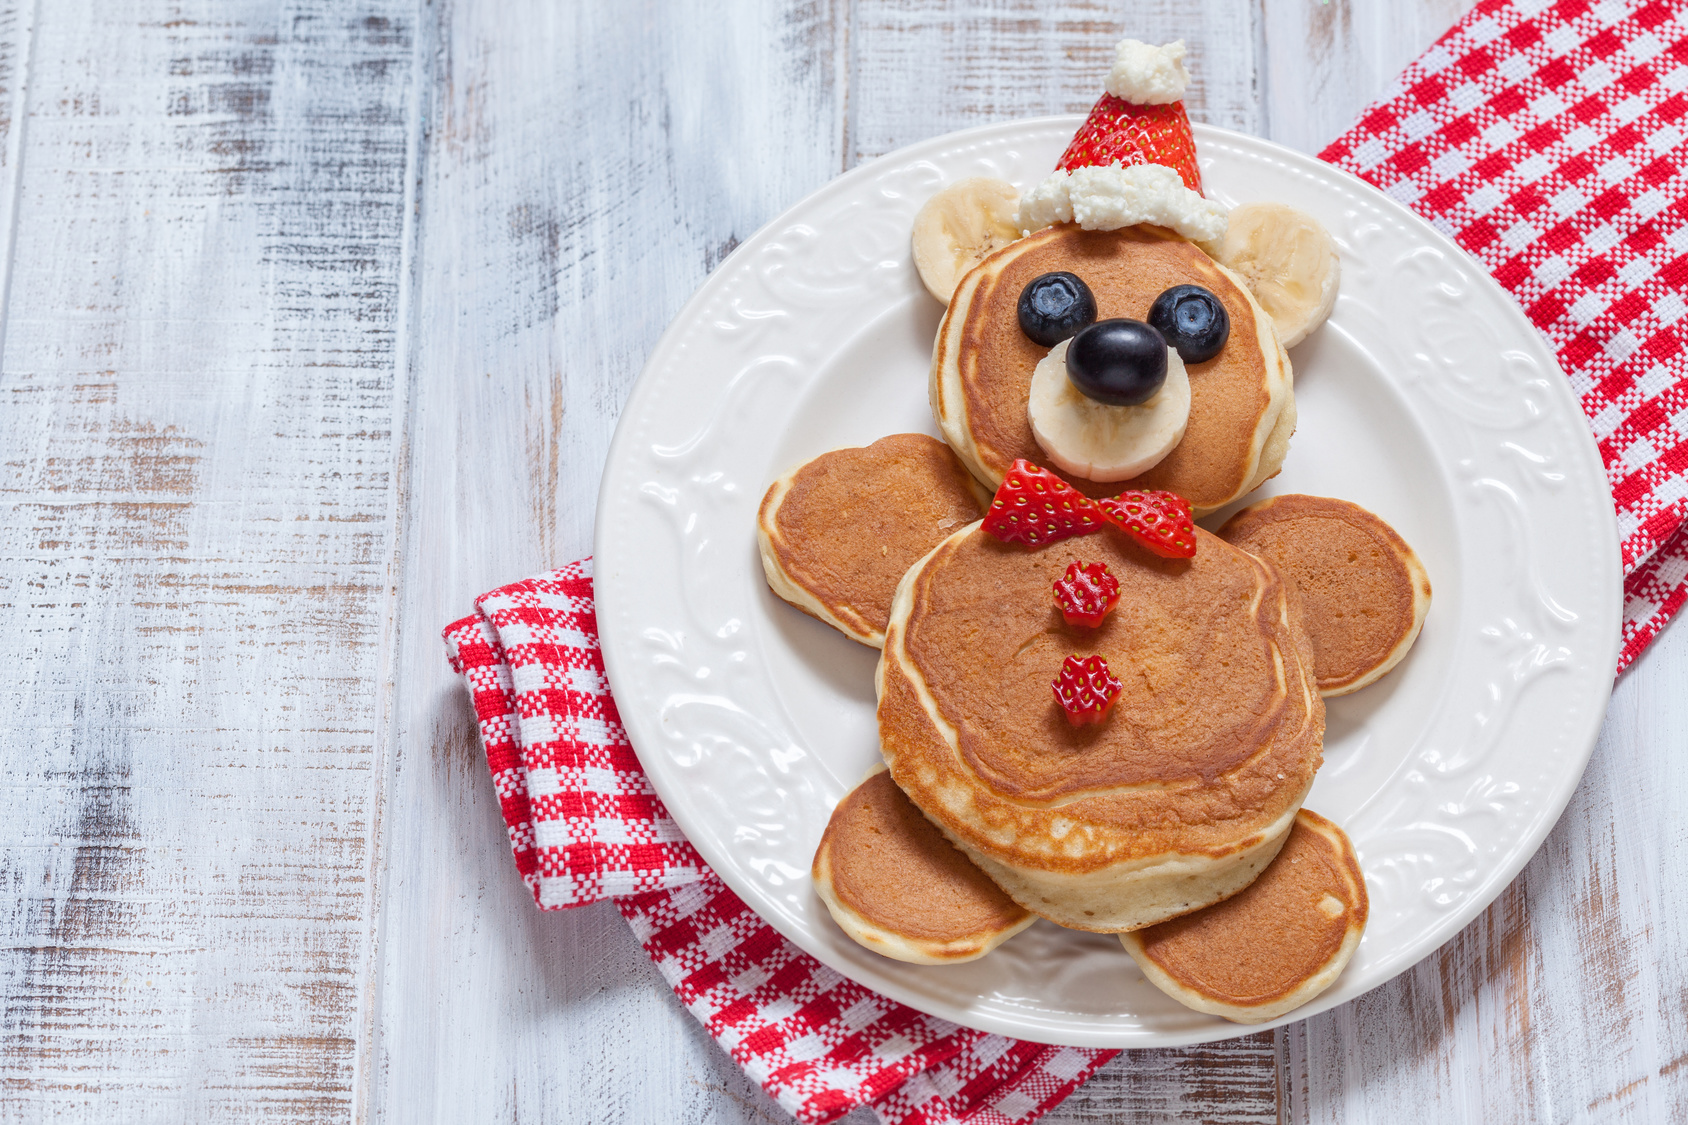 Funny bear pancakes with berries for kids breakfast